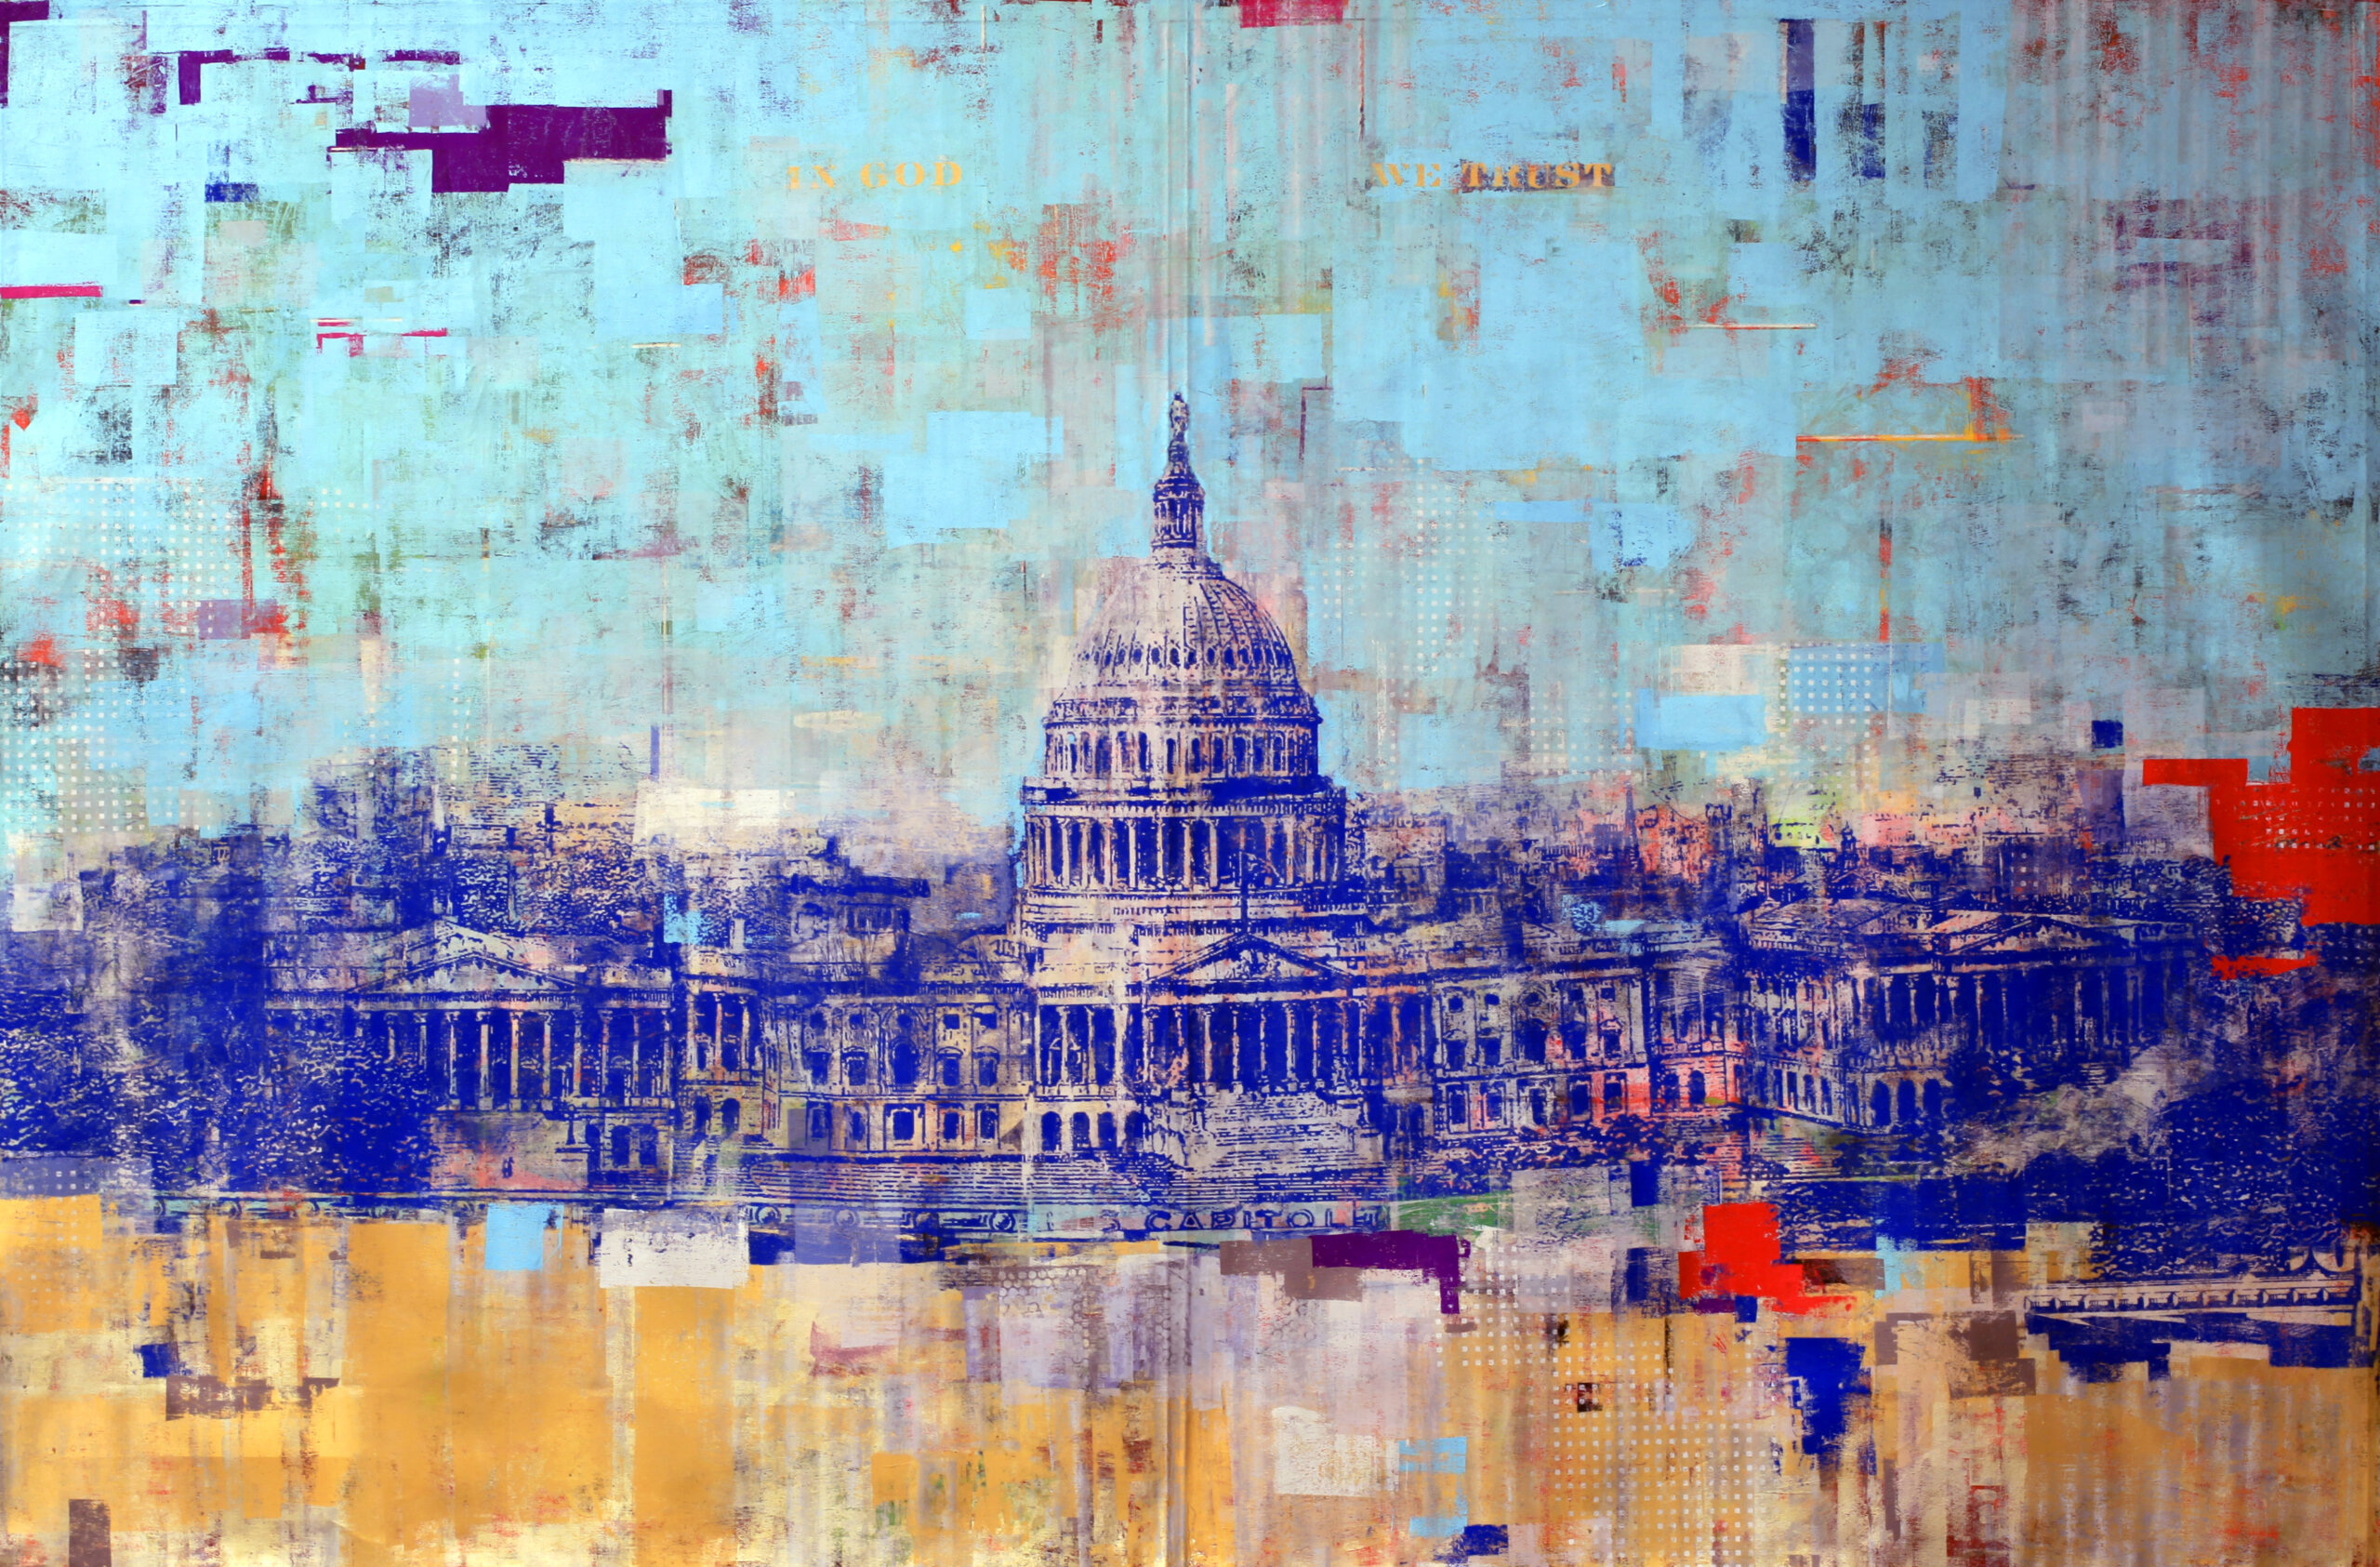 "$50 US Capitol" by Houben R.T.